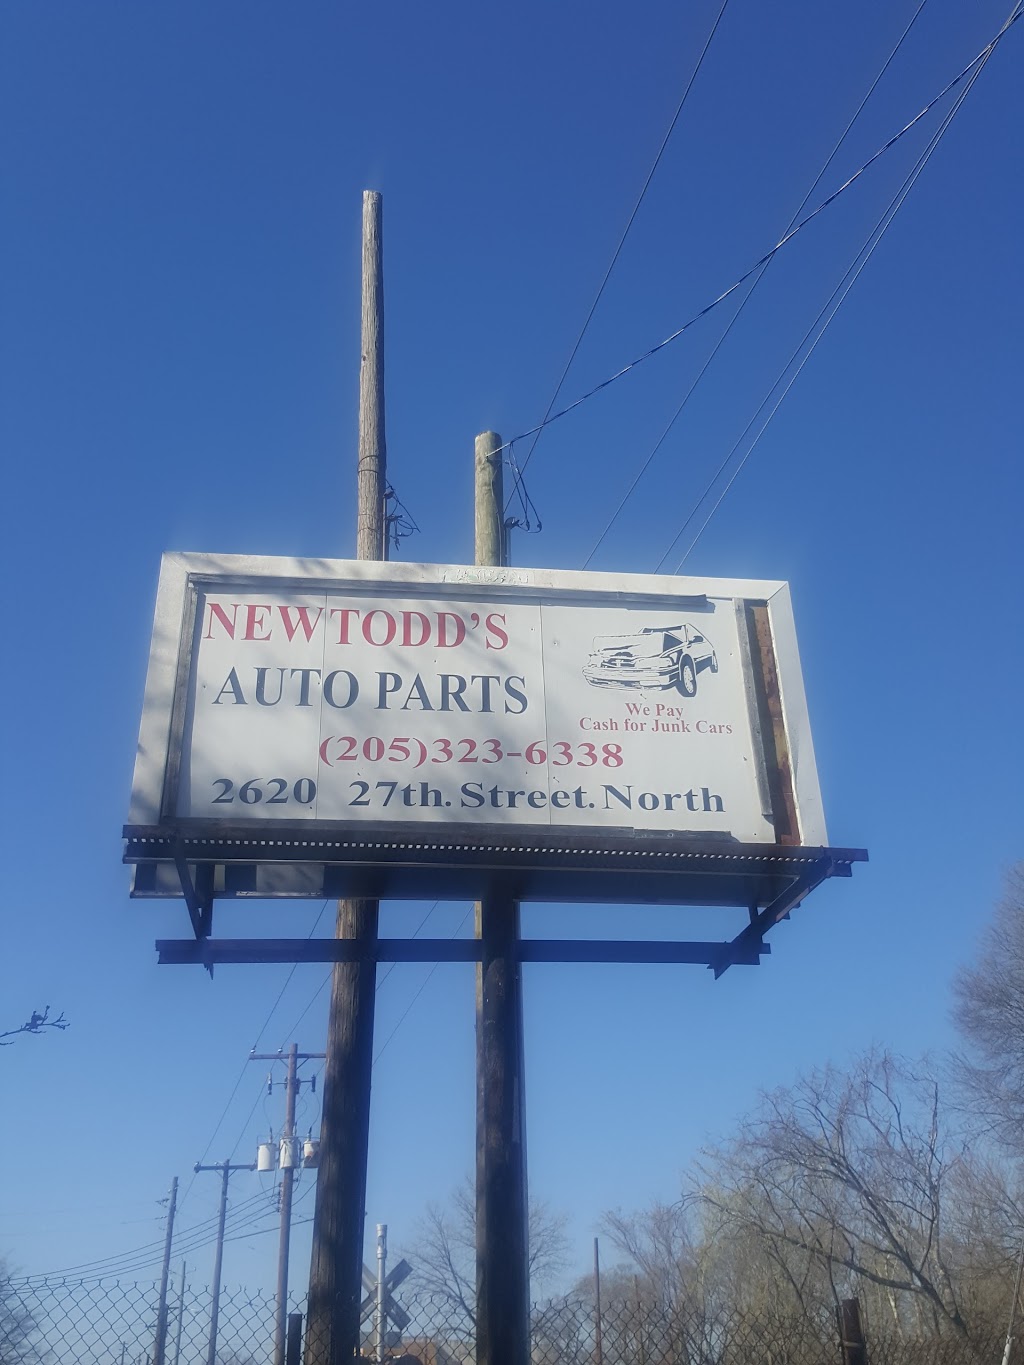 New Todds Auto Parts And Used Car Dealer | 2620 27th Ave N #4606, Birmingham, AL 35207 | Phone: (205) 323-6338